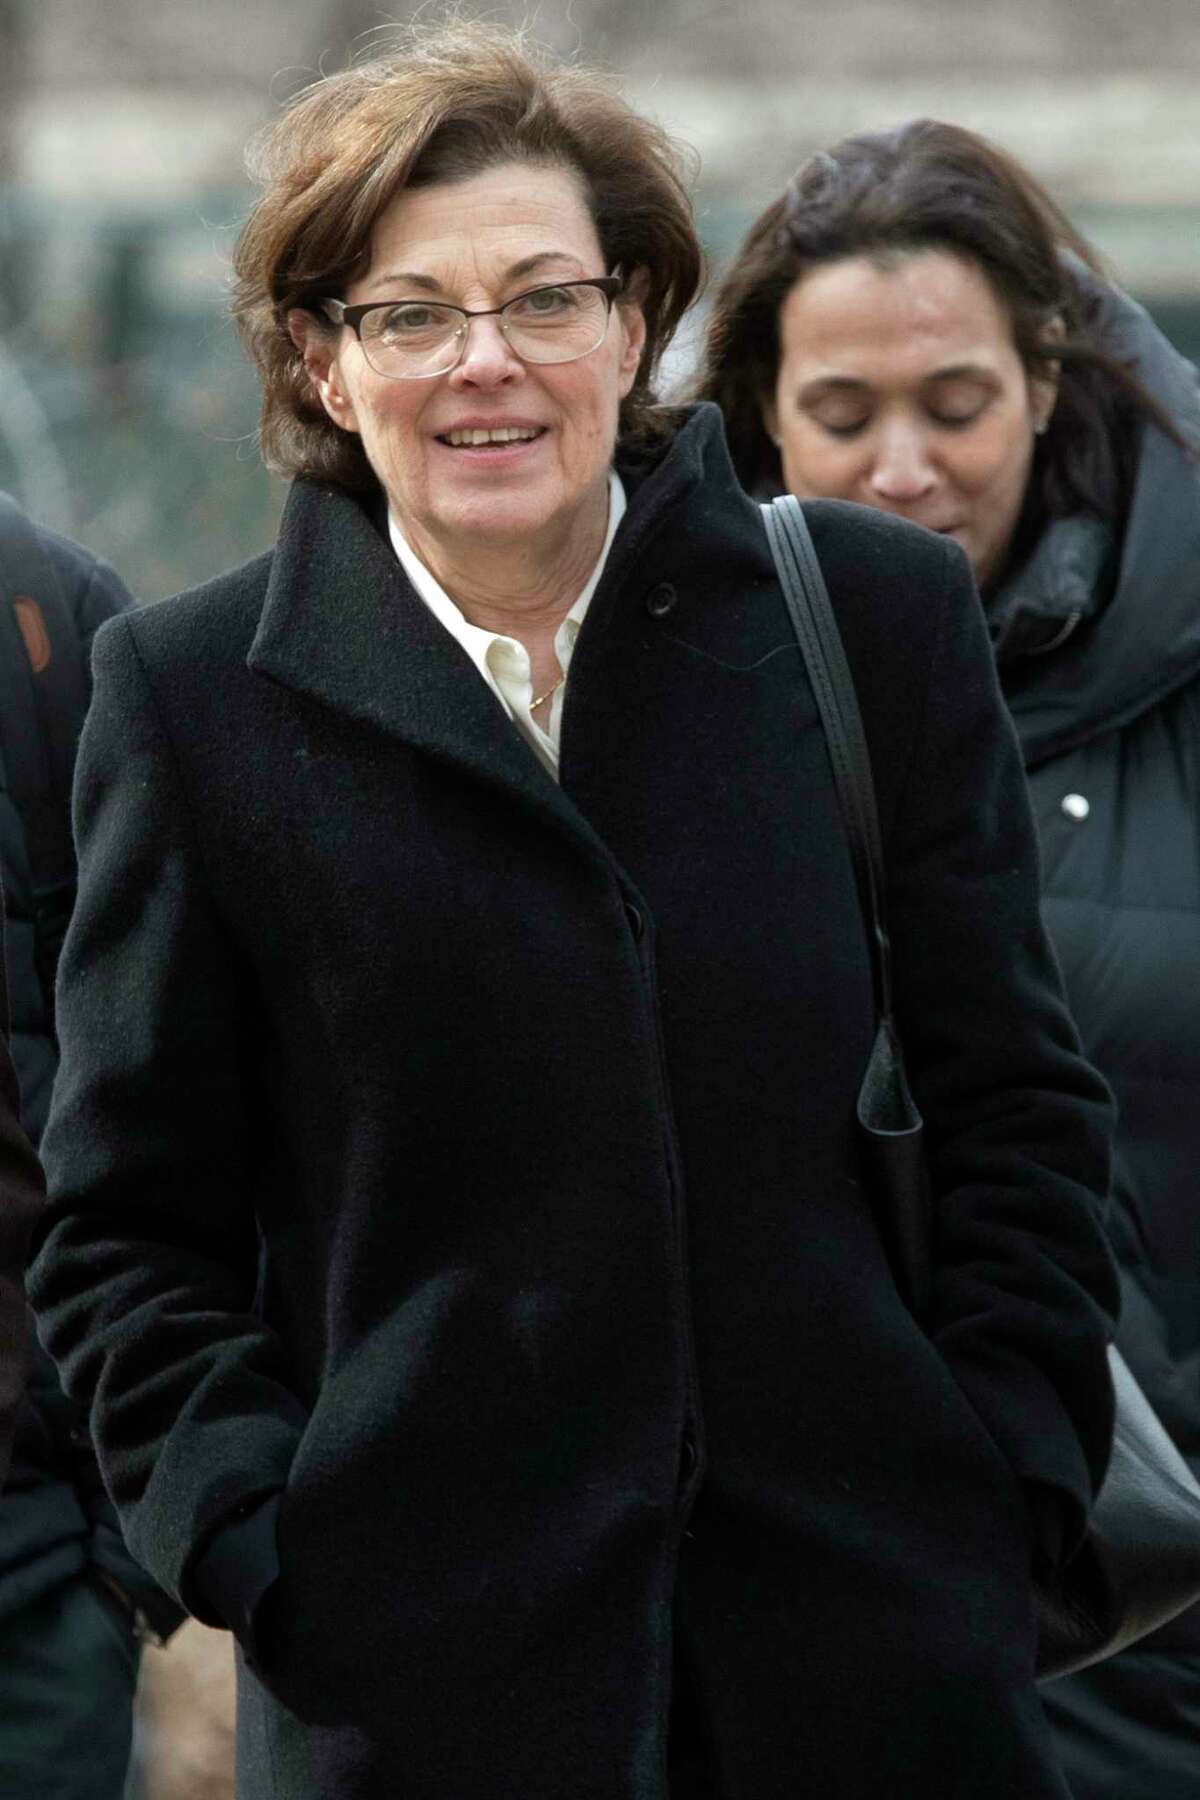 Nancy Salzman is expected to be sentenced Wednesday for federal crimes she committed as the president of NXIVM, the cult-like organization her co-founder Keith Raniere exploited to have sex with unaged girls. Federal prosecutors describe Salzman as a Raniere devotee and top leader of the organization who targeted his perceived "enemies." In this photograph, Salzman arrives at Brooklyn federal court on Wednesday, March 13, 2019. She was the first of six defendants in the federal criminal case to plead guilty. (Mary Altaffer / Associated Press)